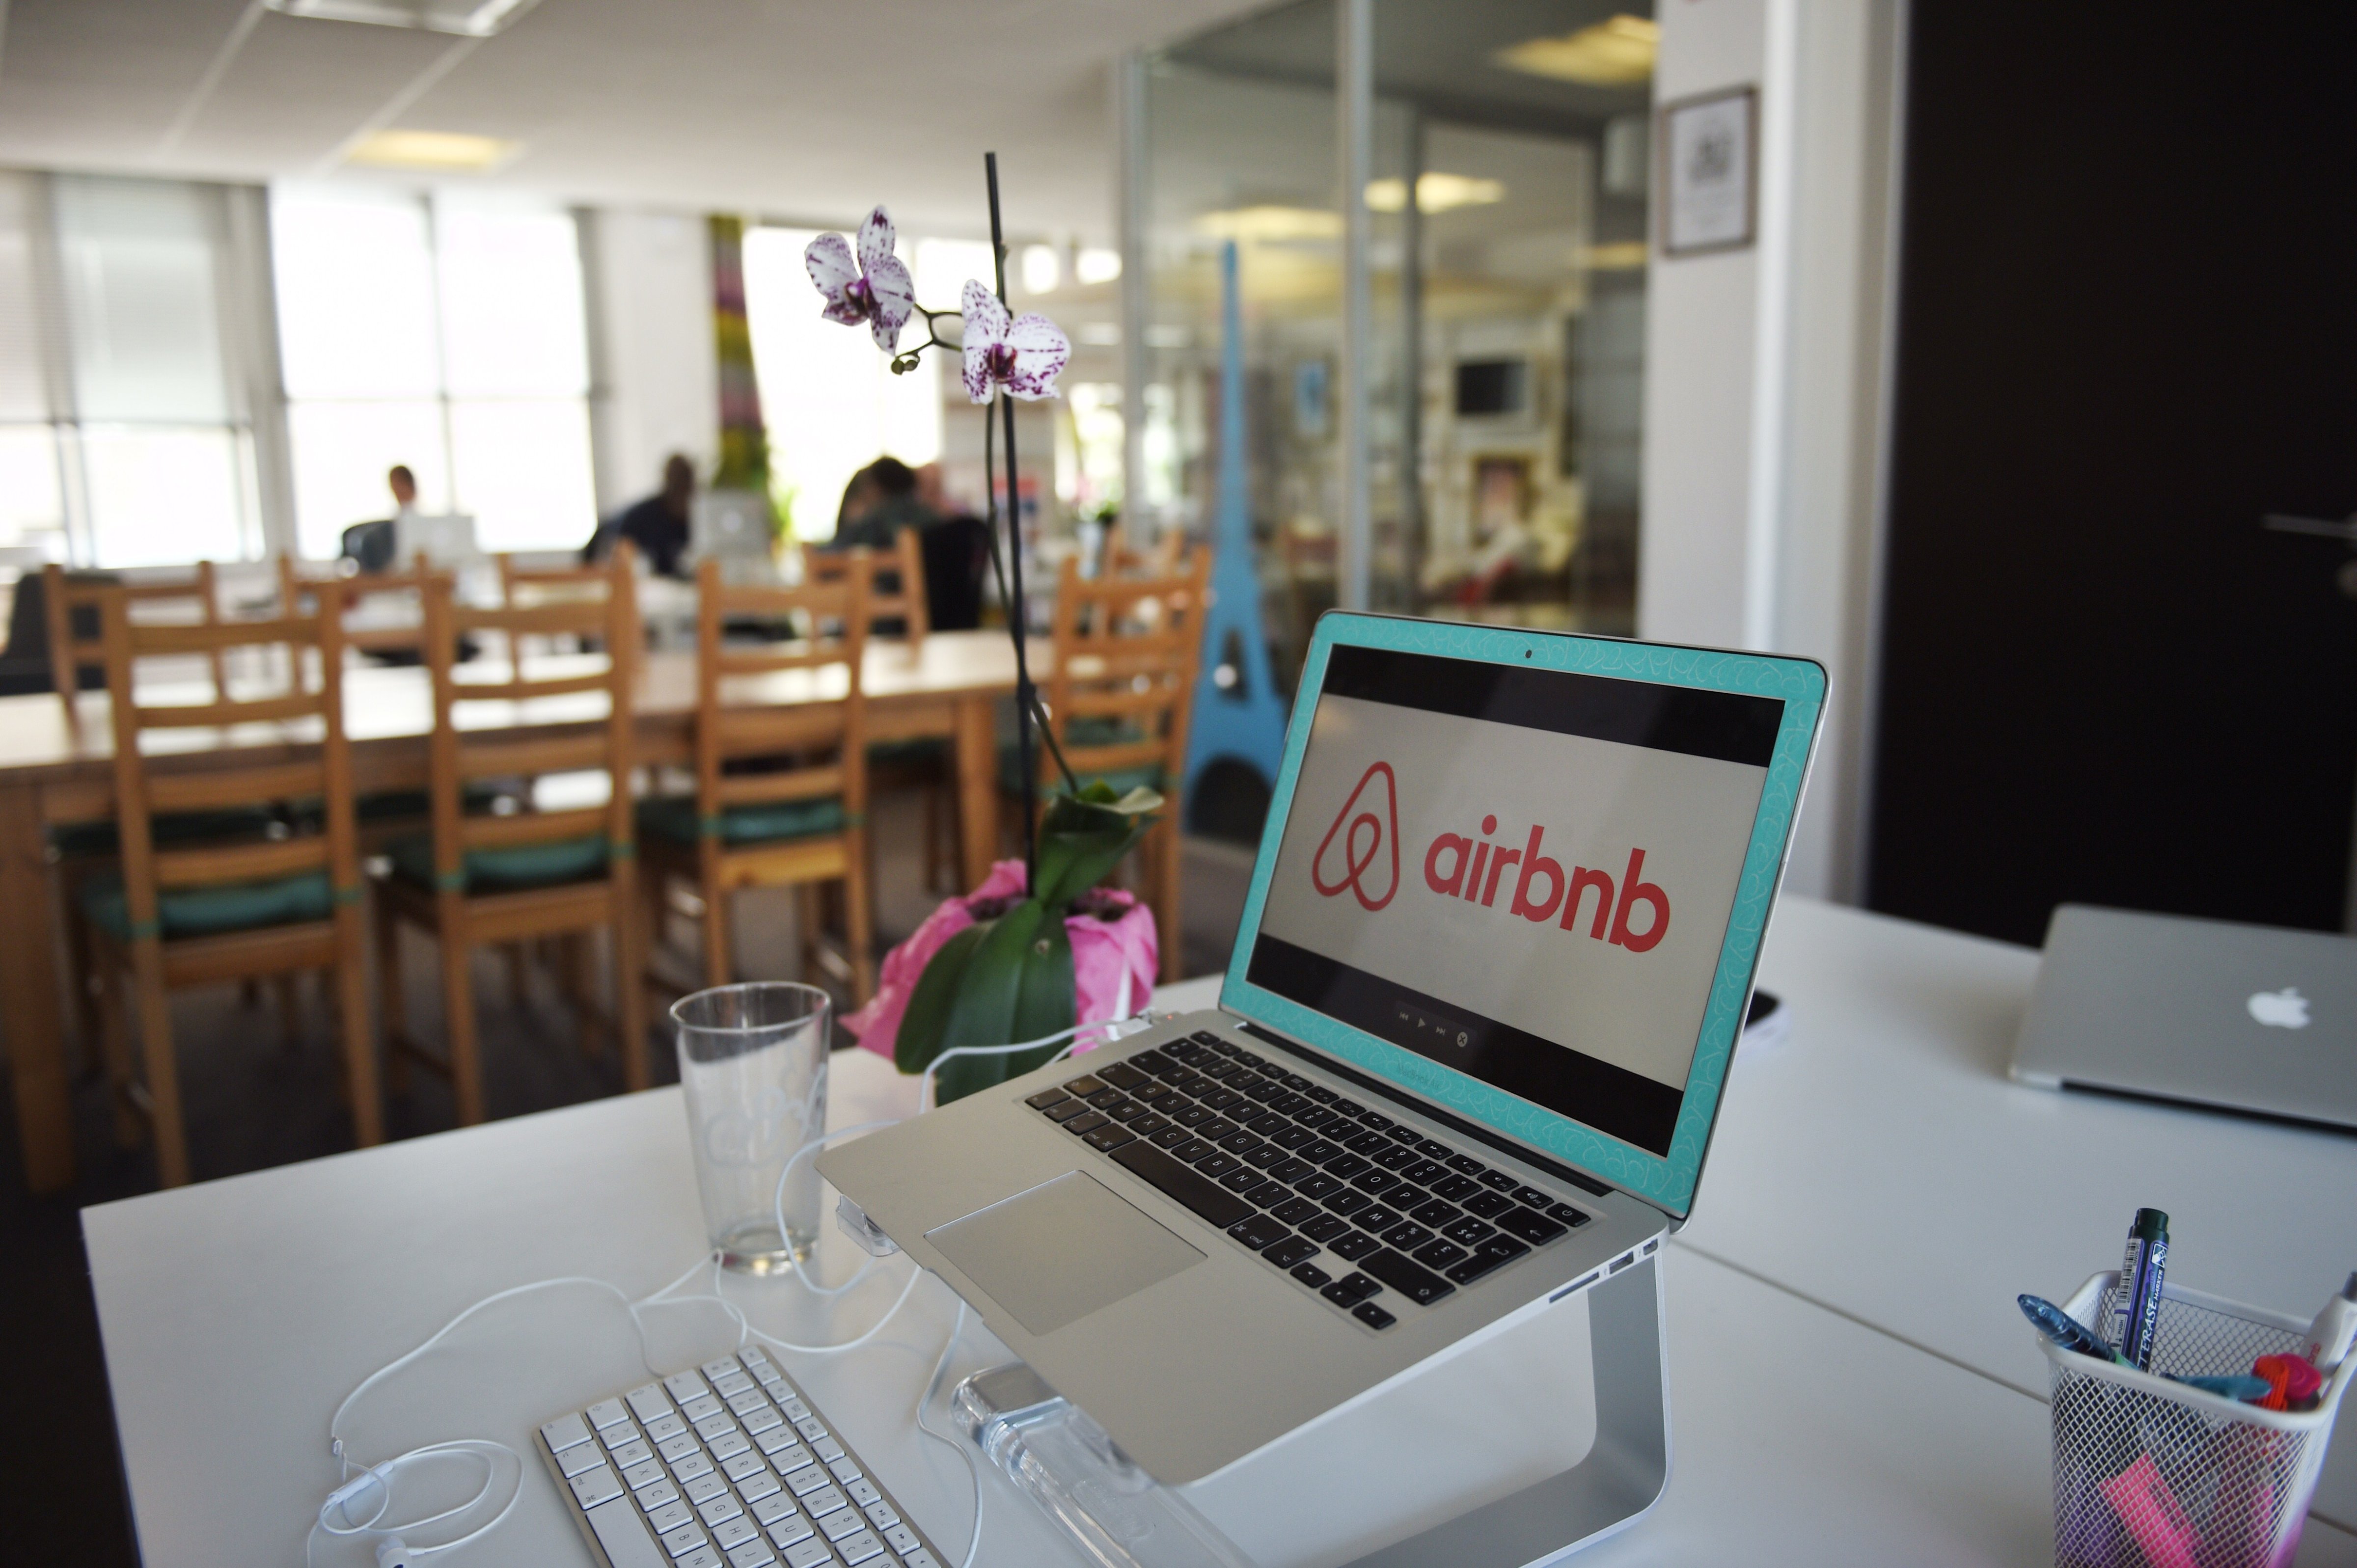 Airbnb logo displayed on a computer screen in the Airbnb offices in Paris on April 21, 2015 (Martin Bureau—AFP/Getty Images)